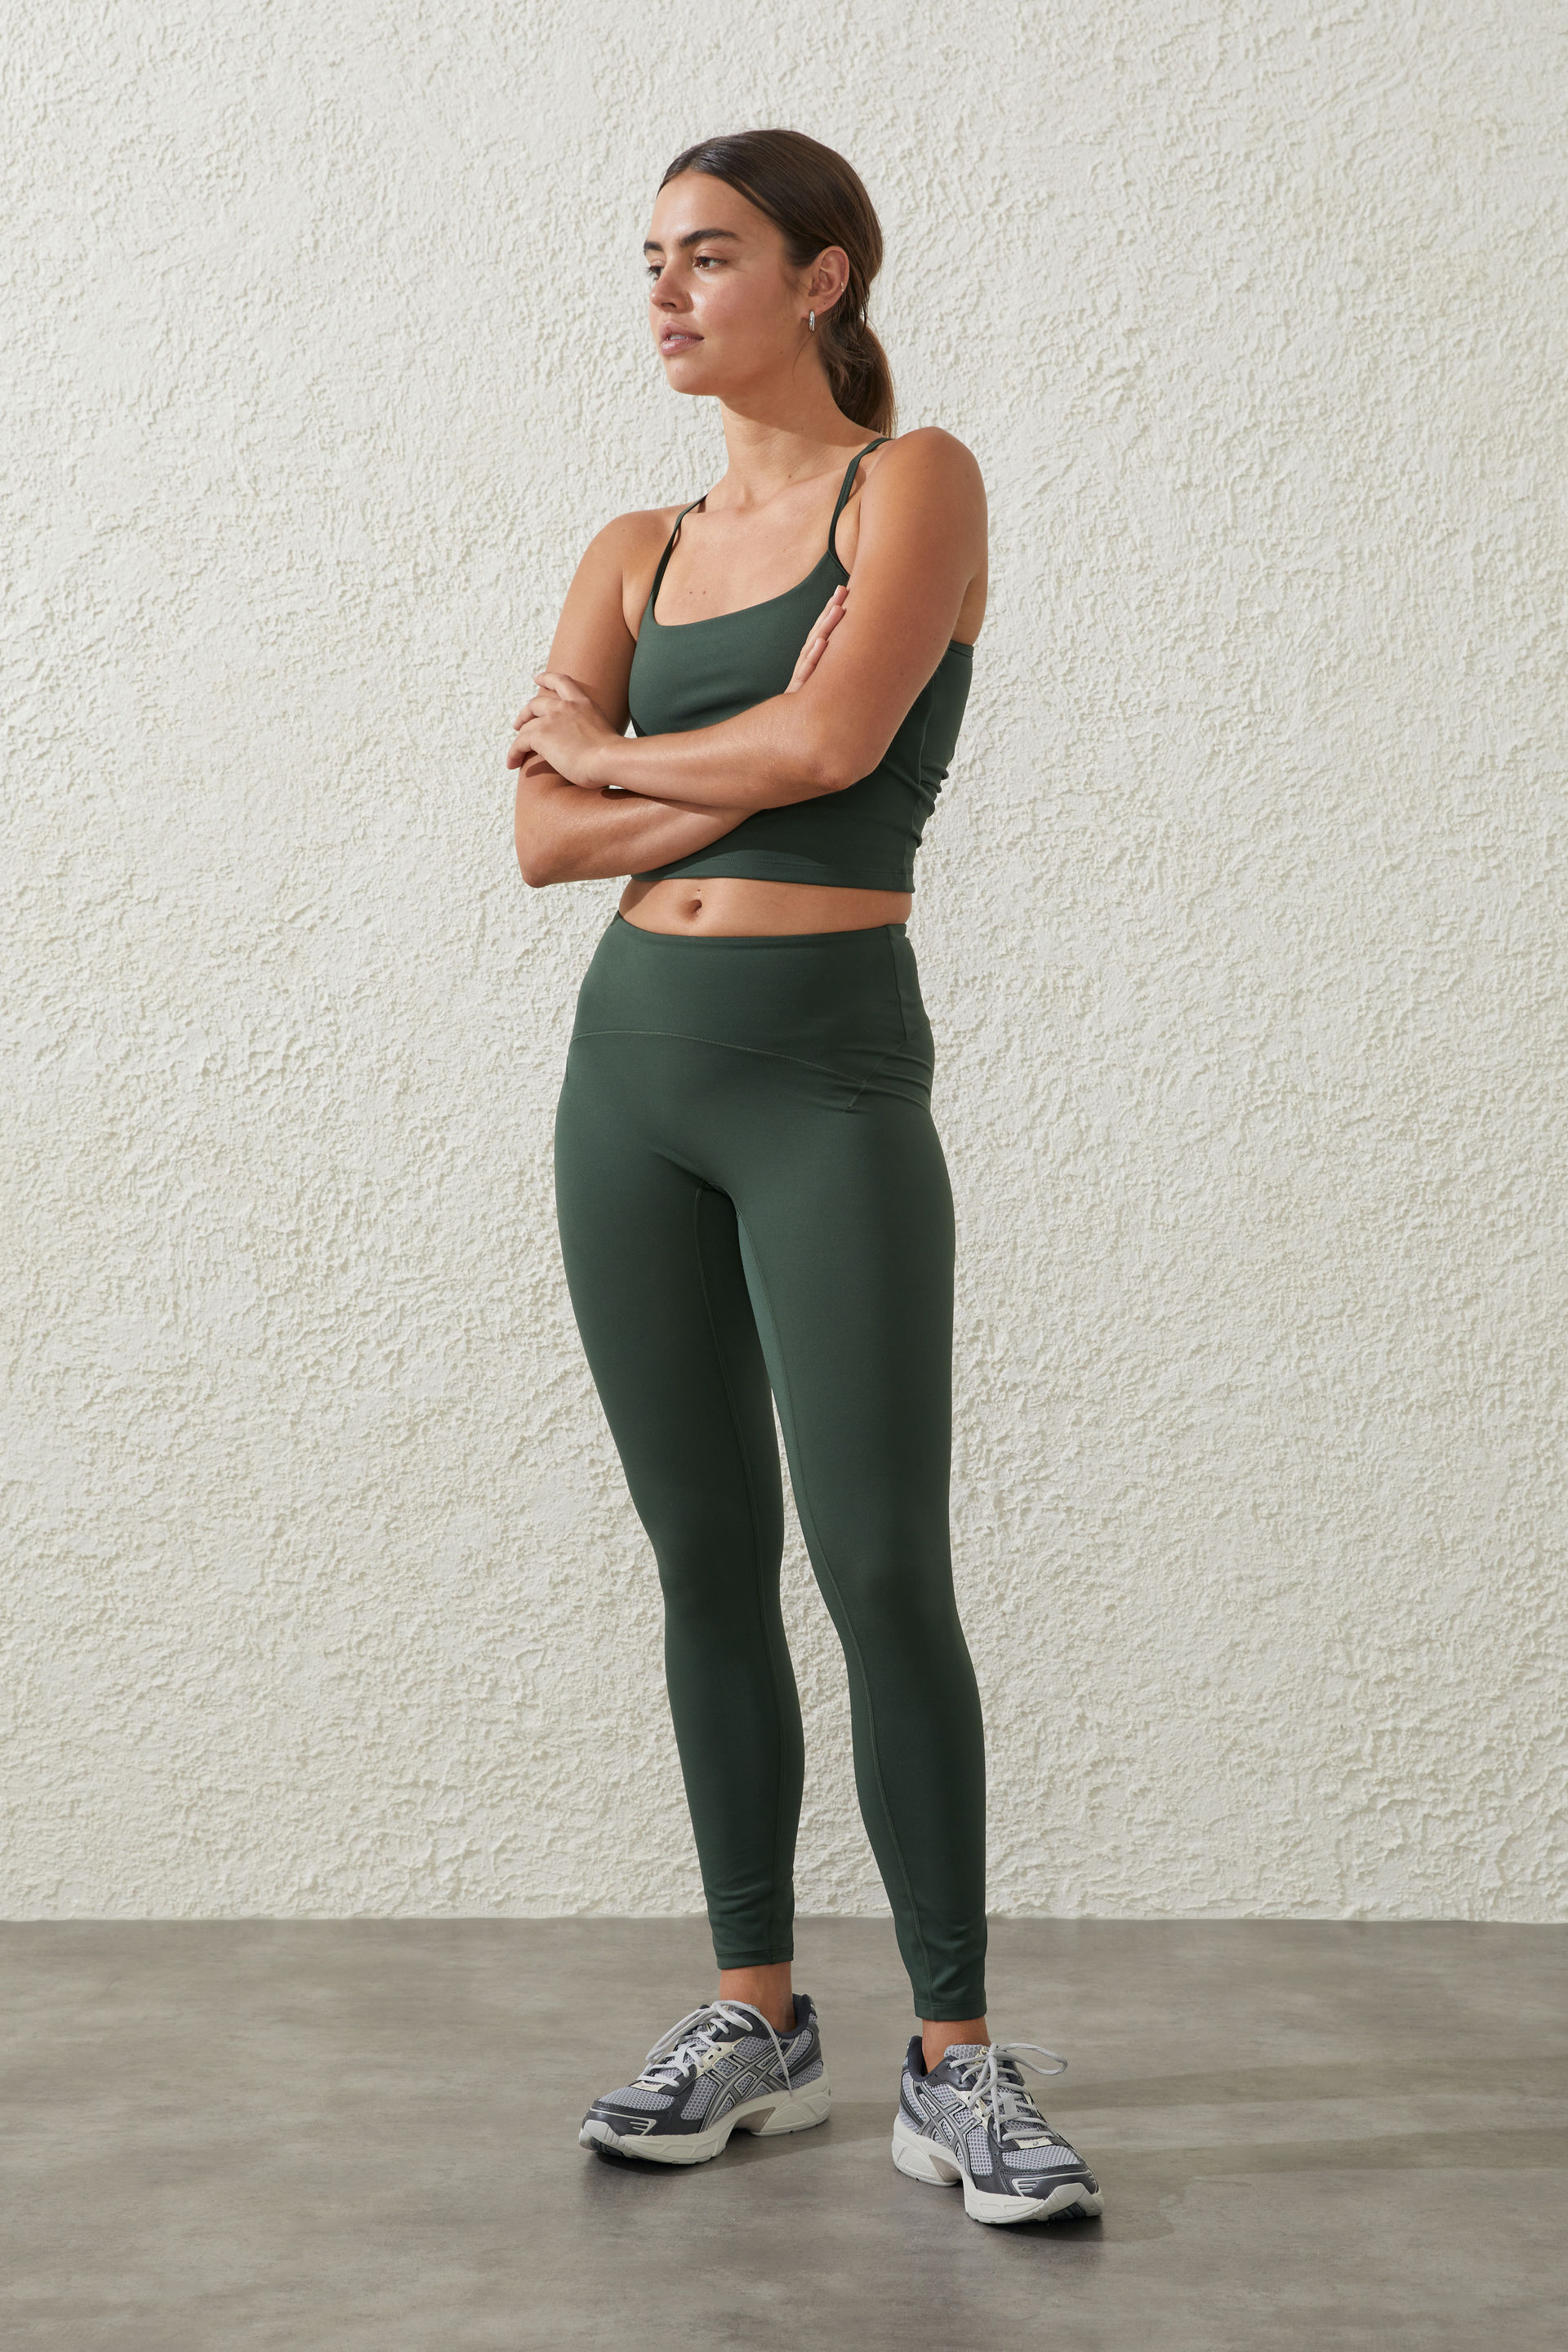 Cotton:On active leggings in green